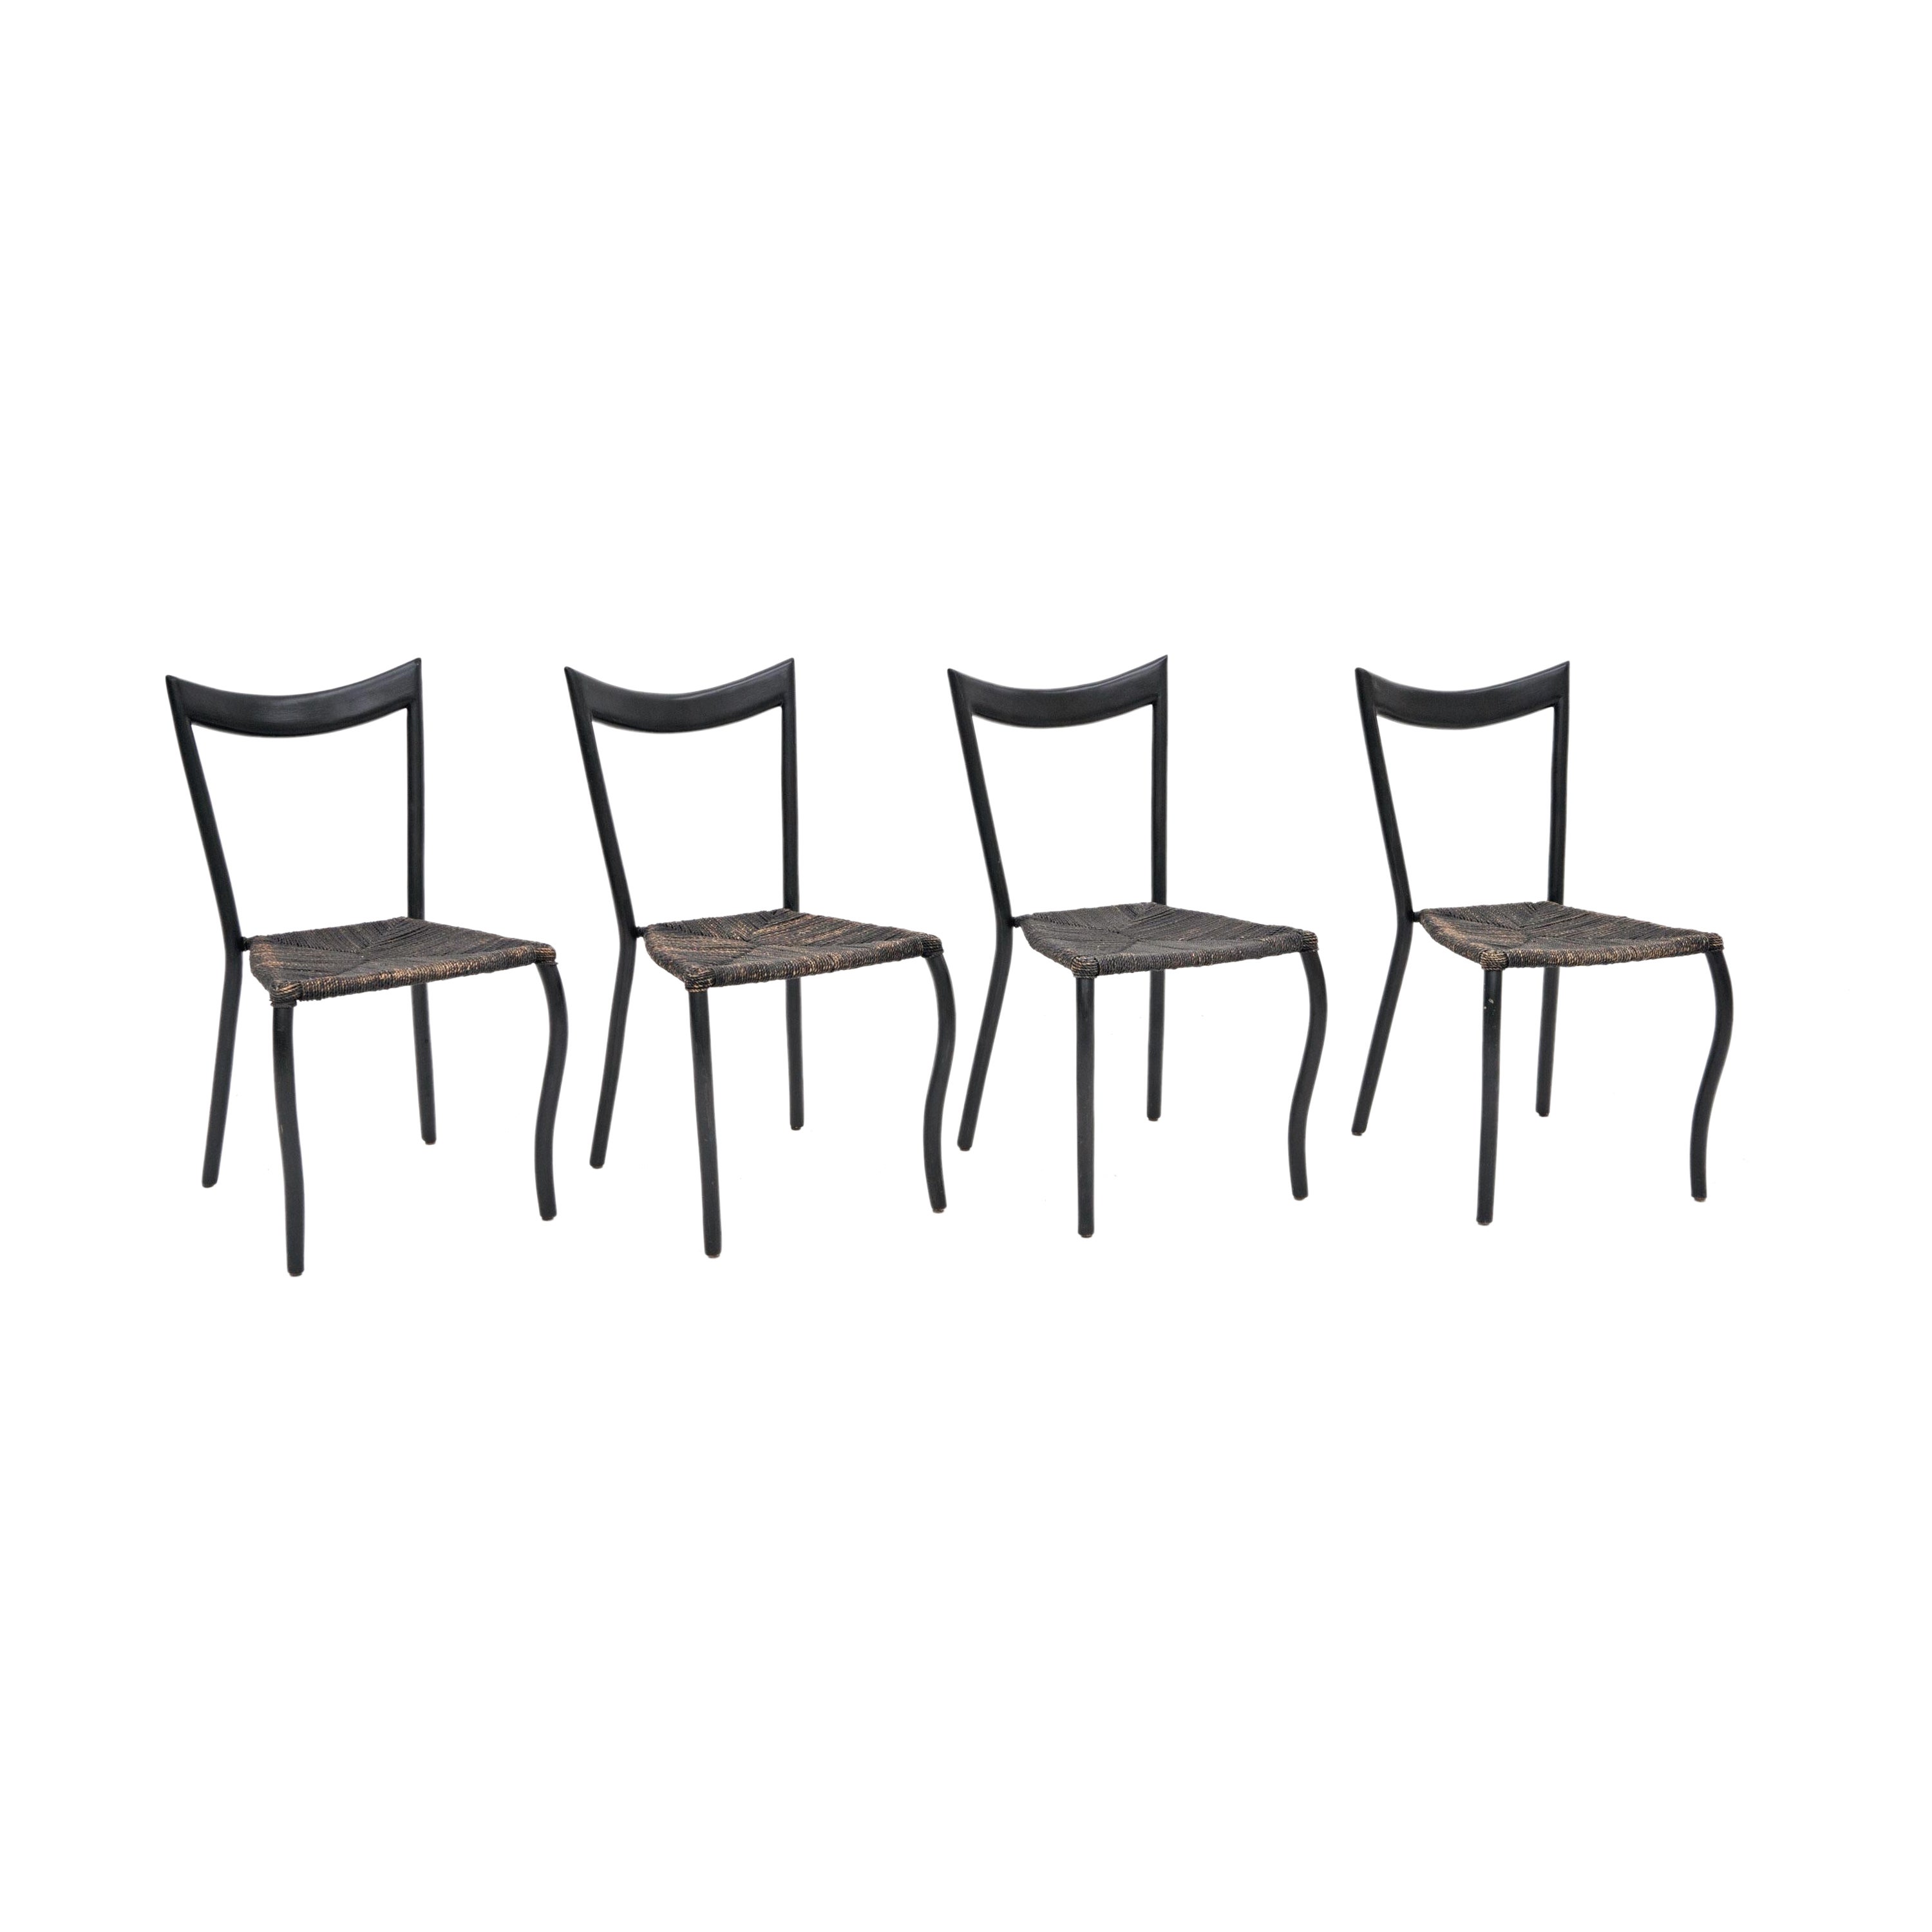 Black Manila Dining Chairs by Val Padilla for Conran, c.1980